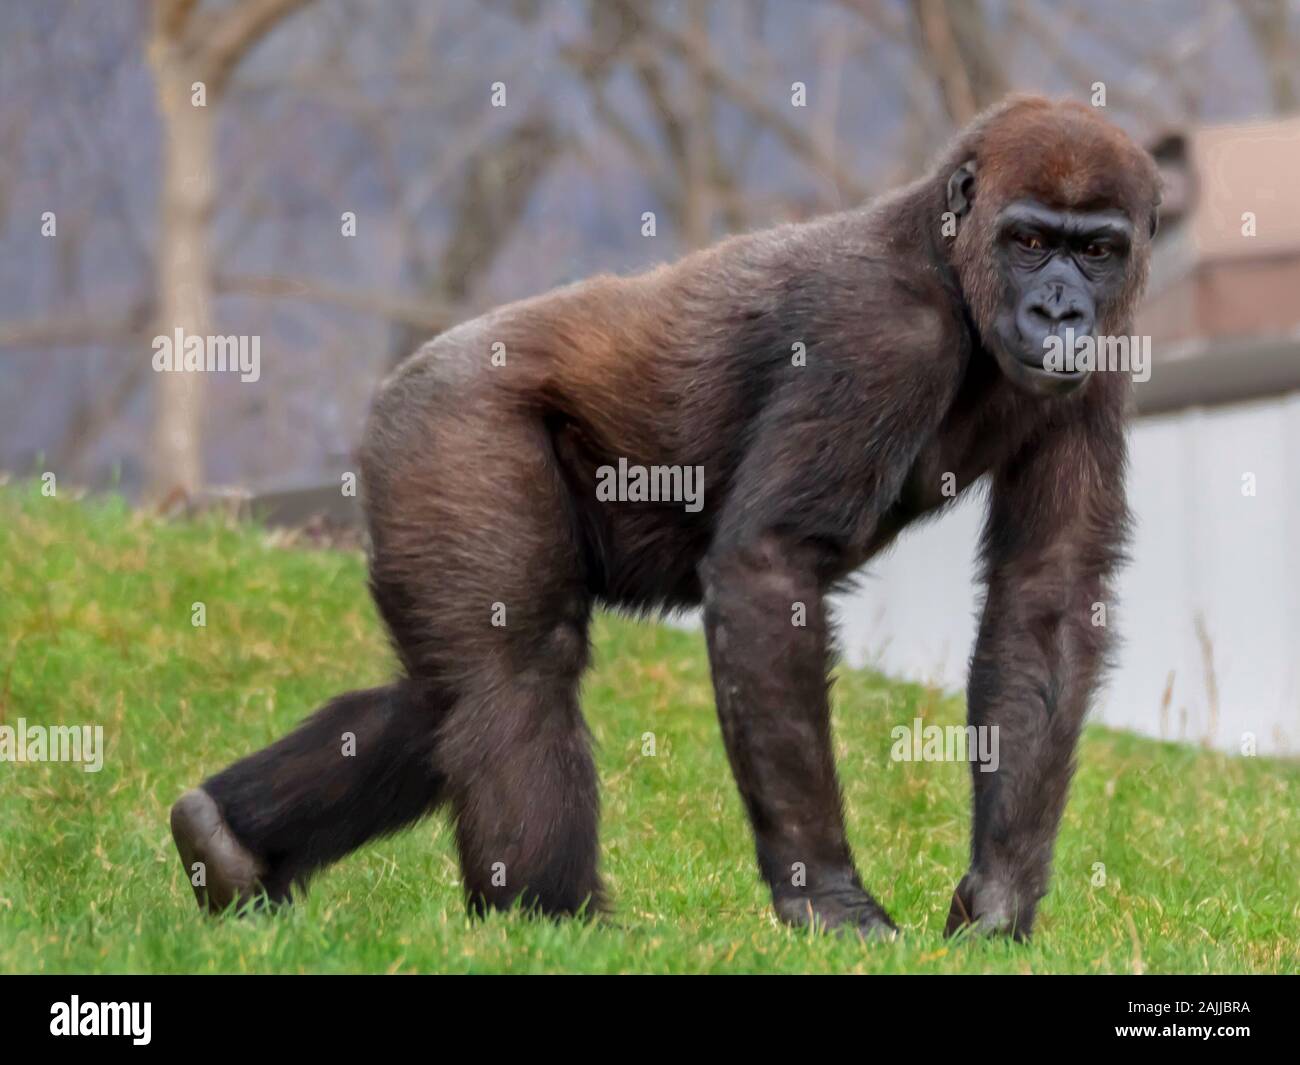 Hairy Brown Gorilla Hunched Over in the Grass Stock Photo